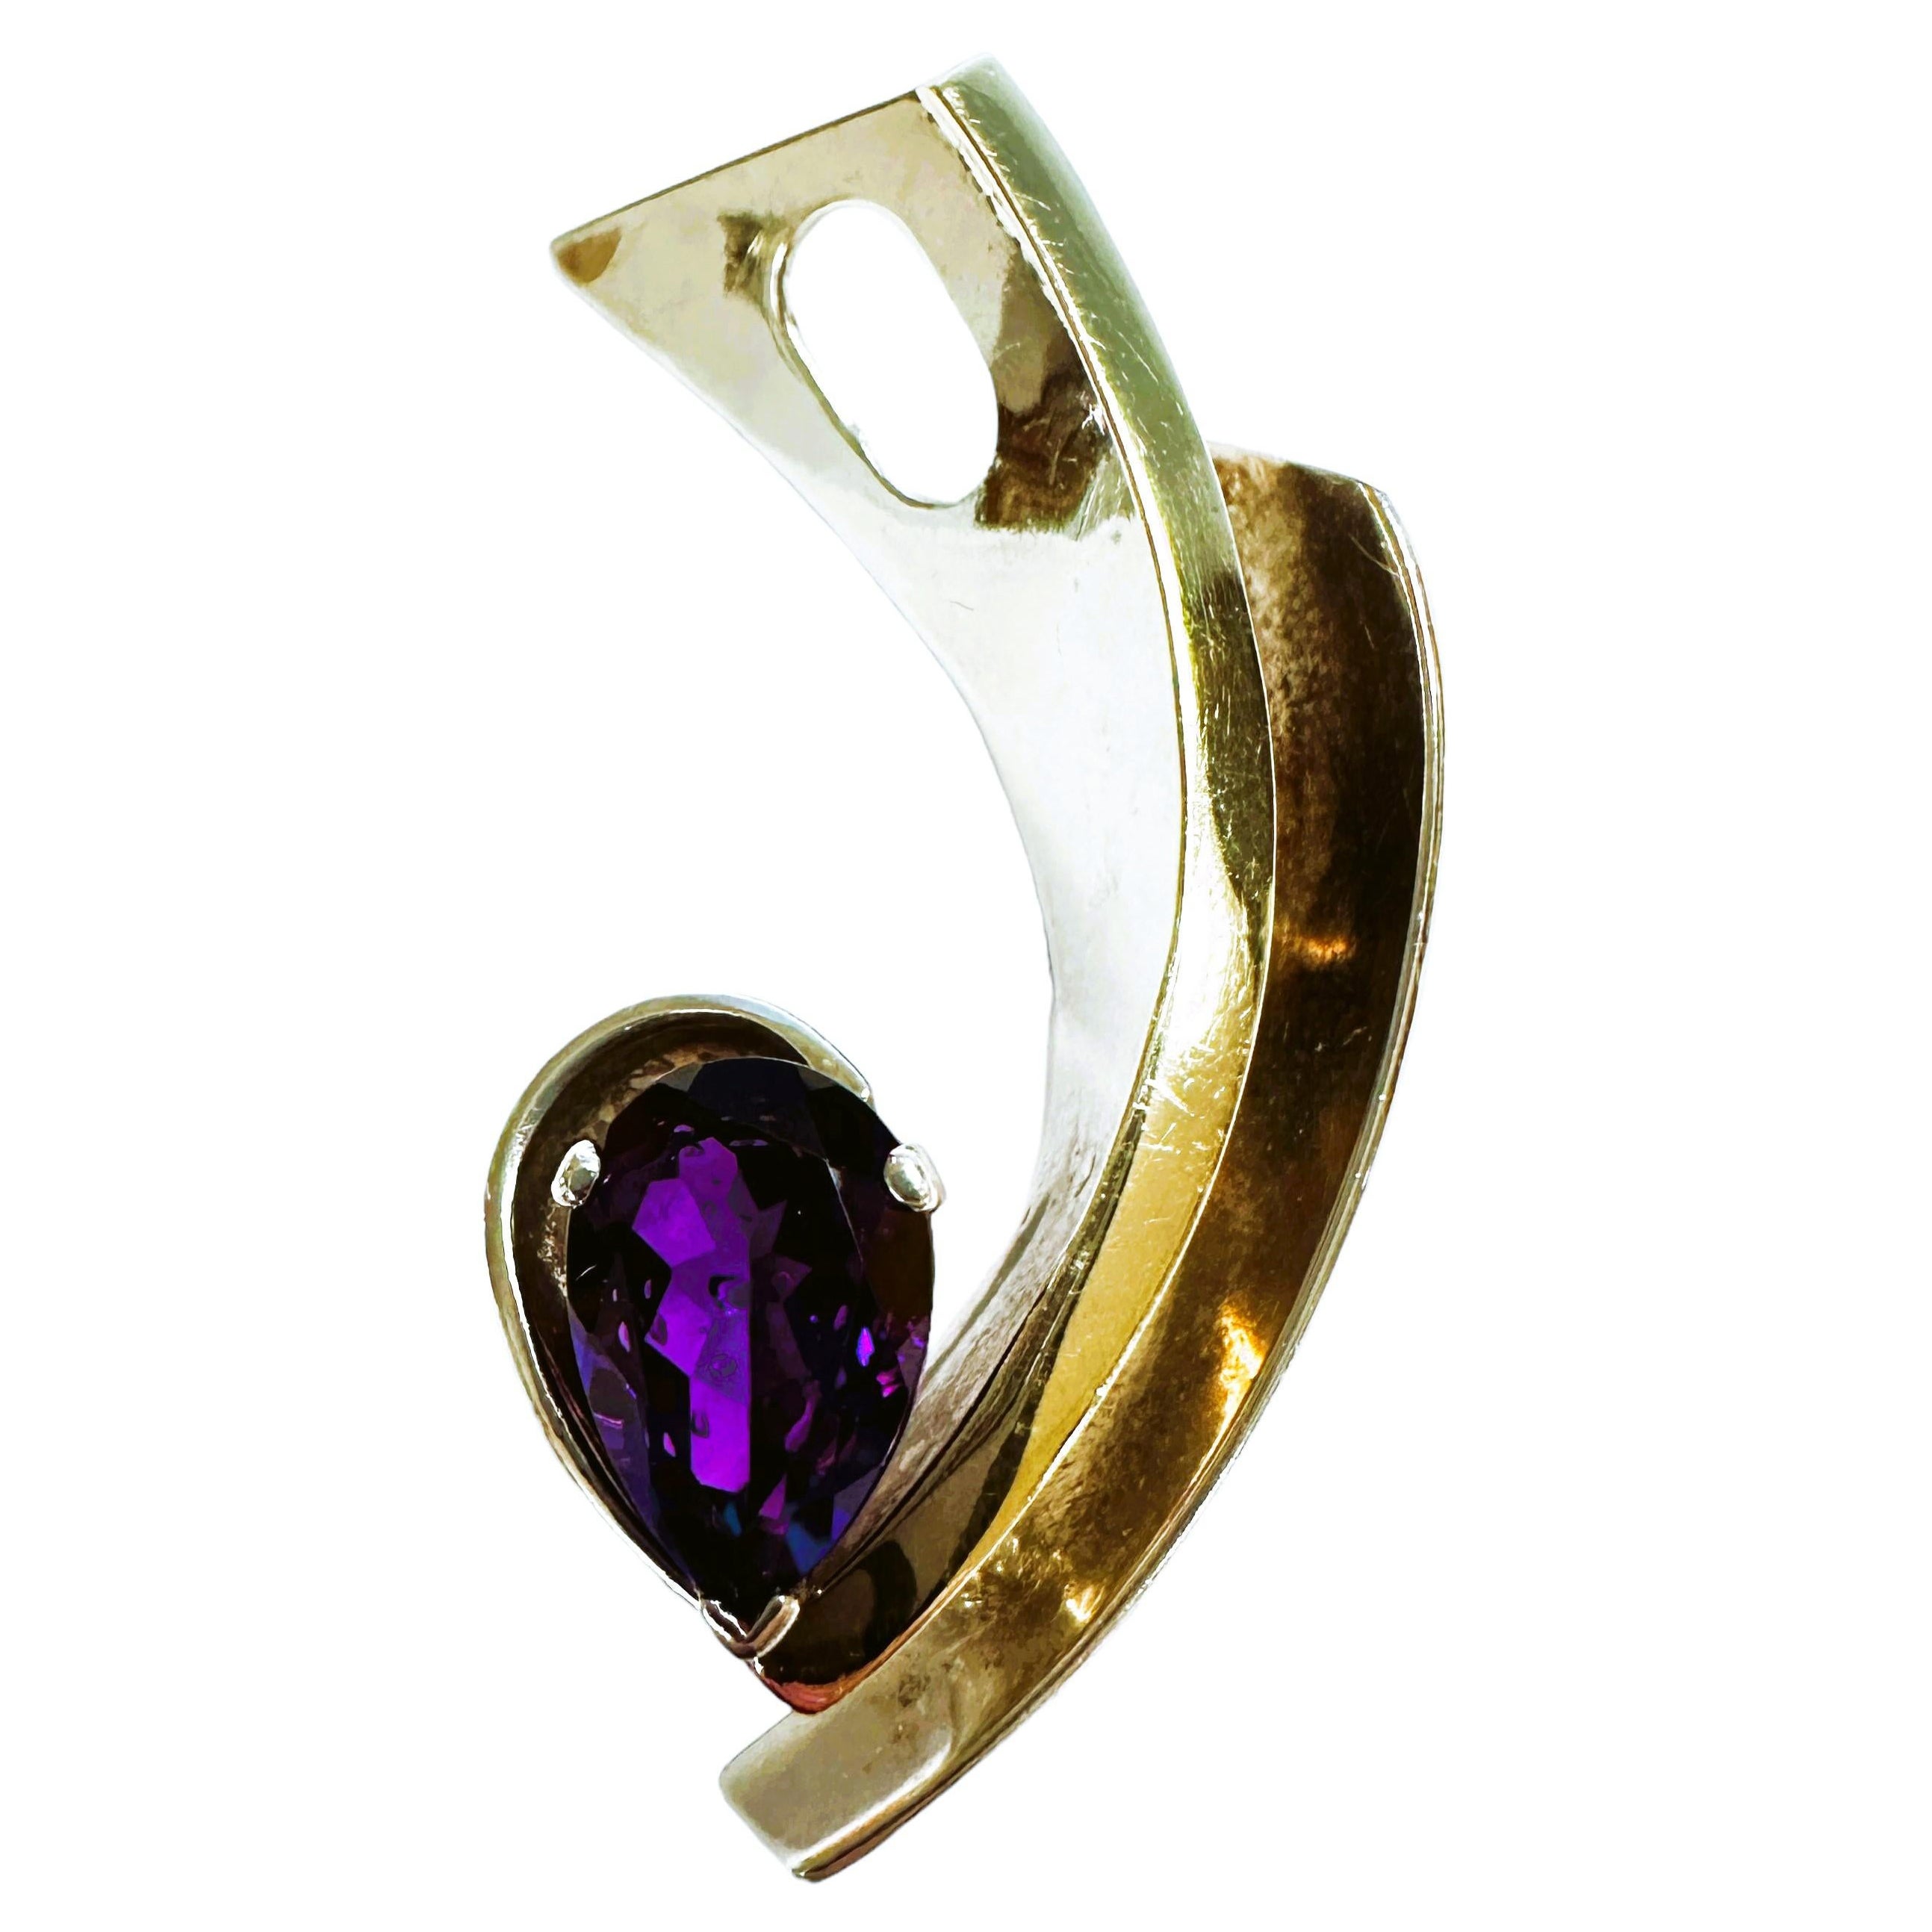 14k Gold & Sterling Silver Modernist Pendant with Purple Spinel